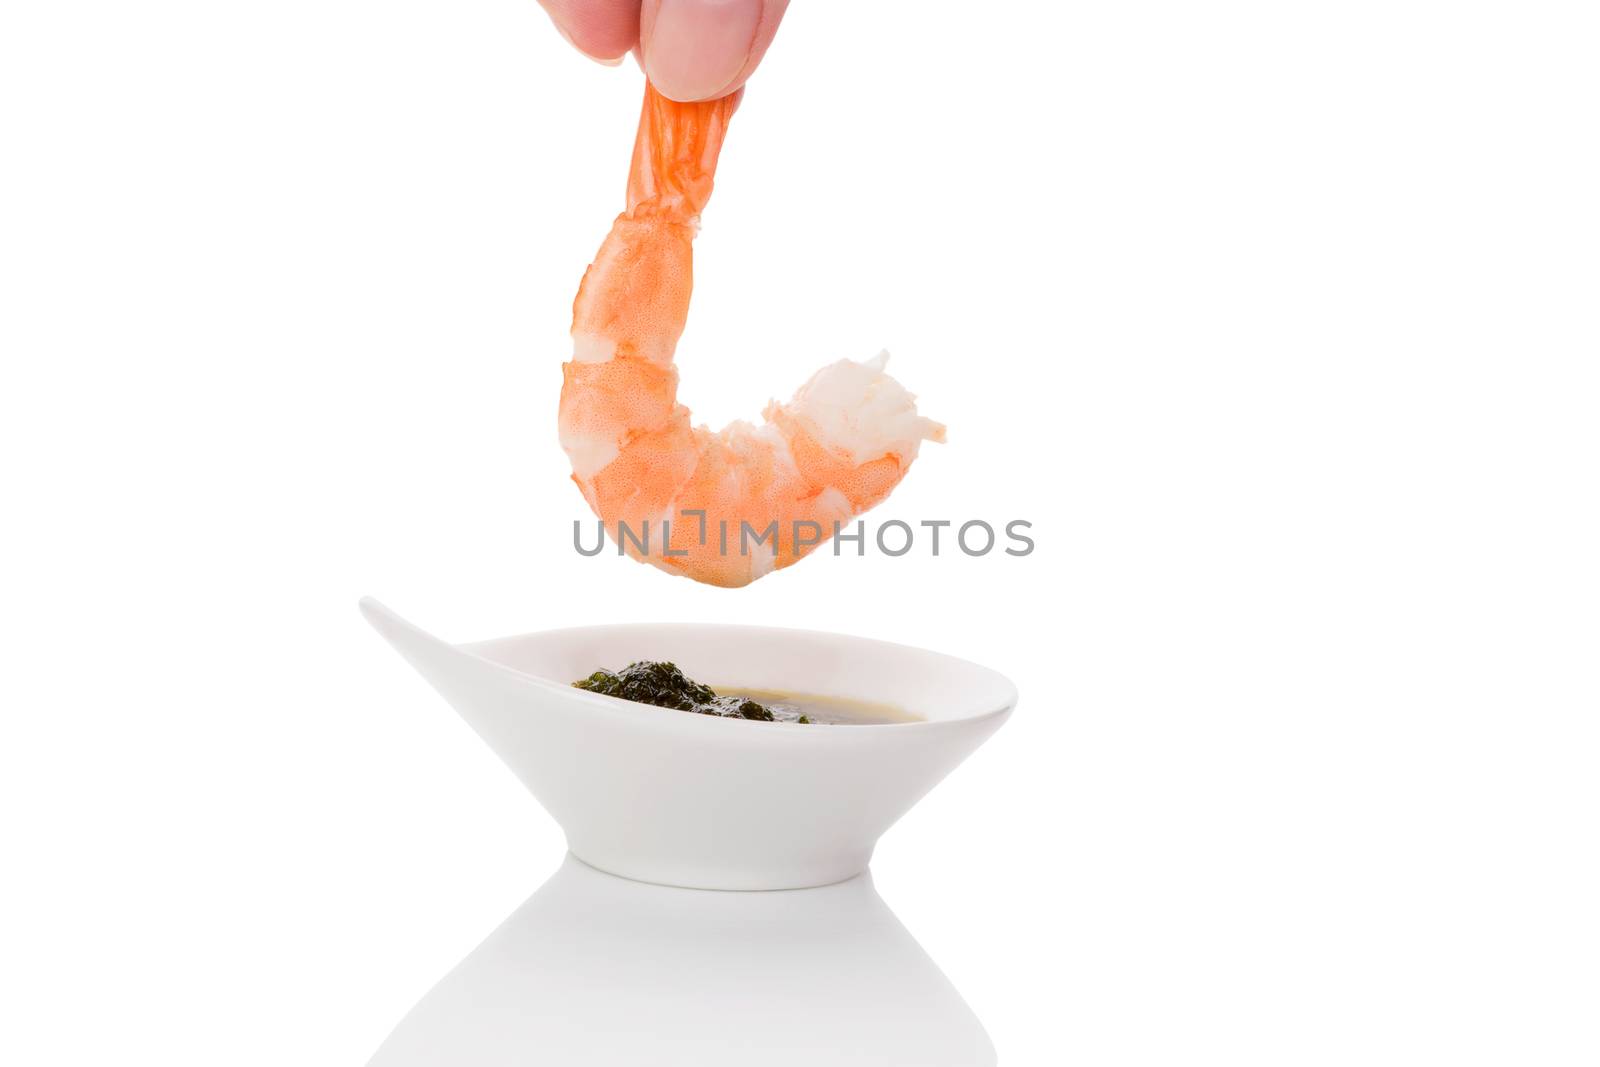 Delicious shrimp eating. Dripping cooked prawn into delicious sauce. Culinary and gourmet eating. 